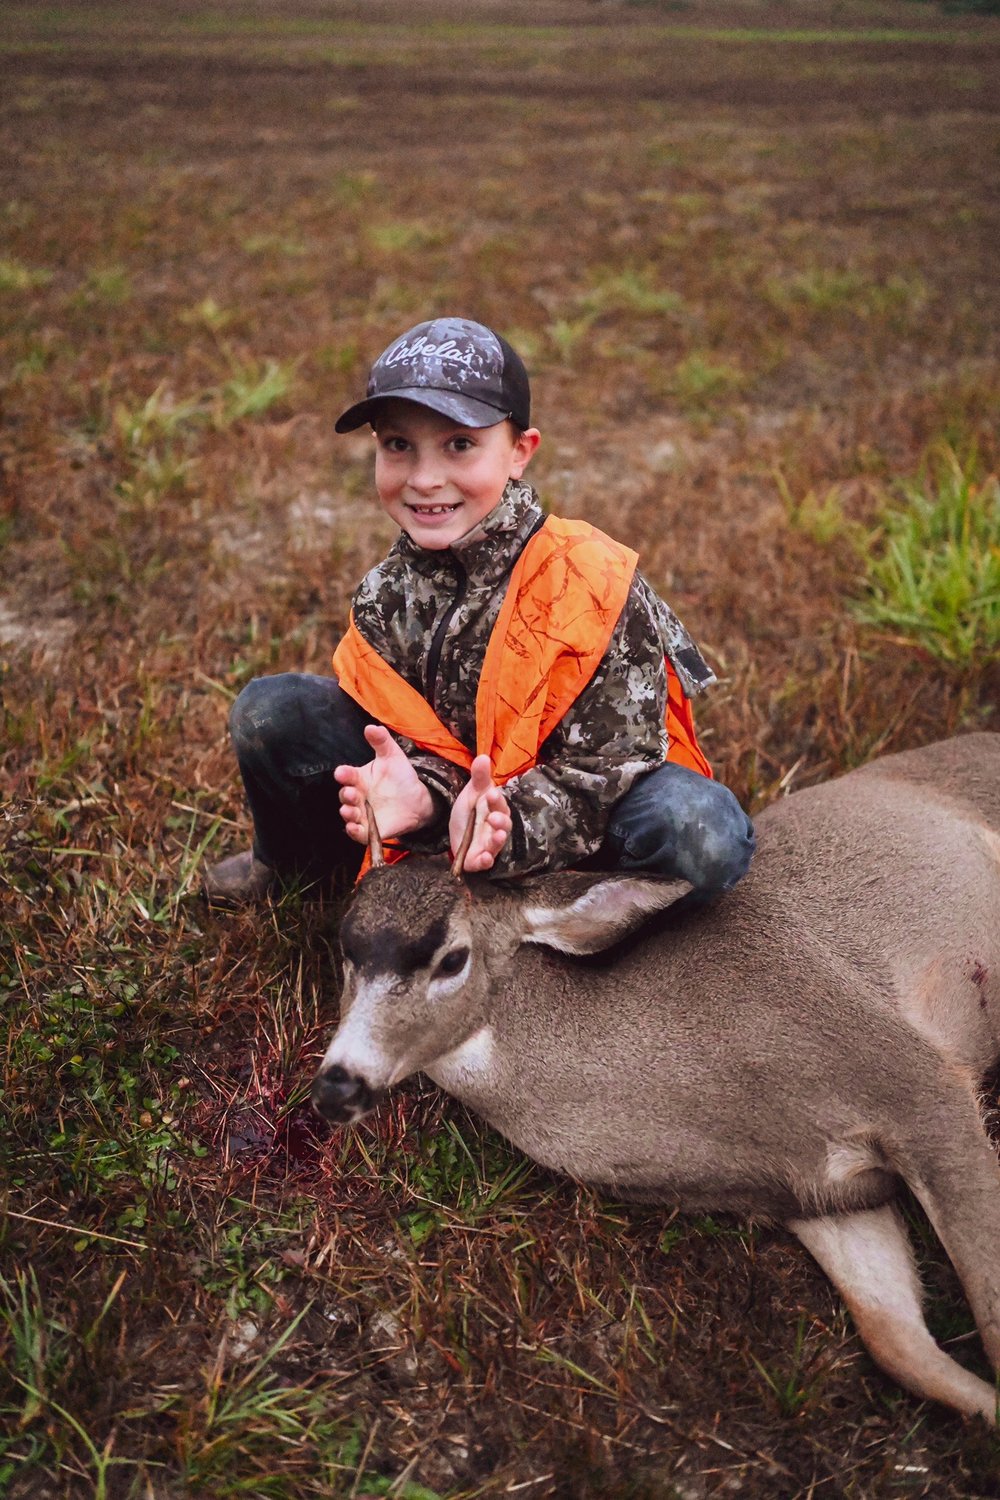 "This is our son, Landon Bozarth, 9, with his first blacktail buck! Harvested October 21, 2022. We are so proud of his accomplishment. So many hours of study, target practice and dedication came together to make this happen." — Brad and Maleah Bozarth